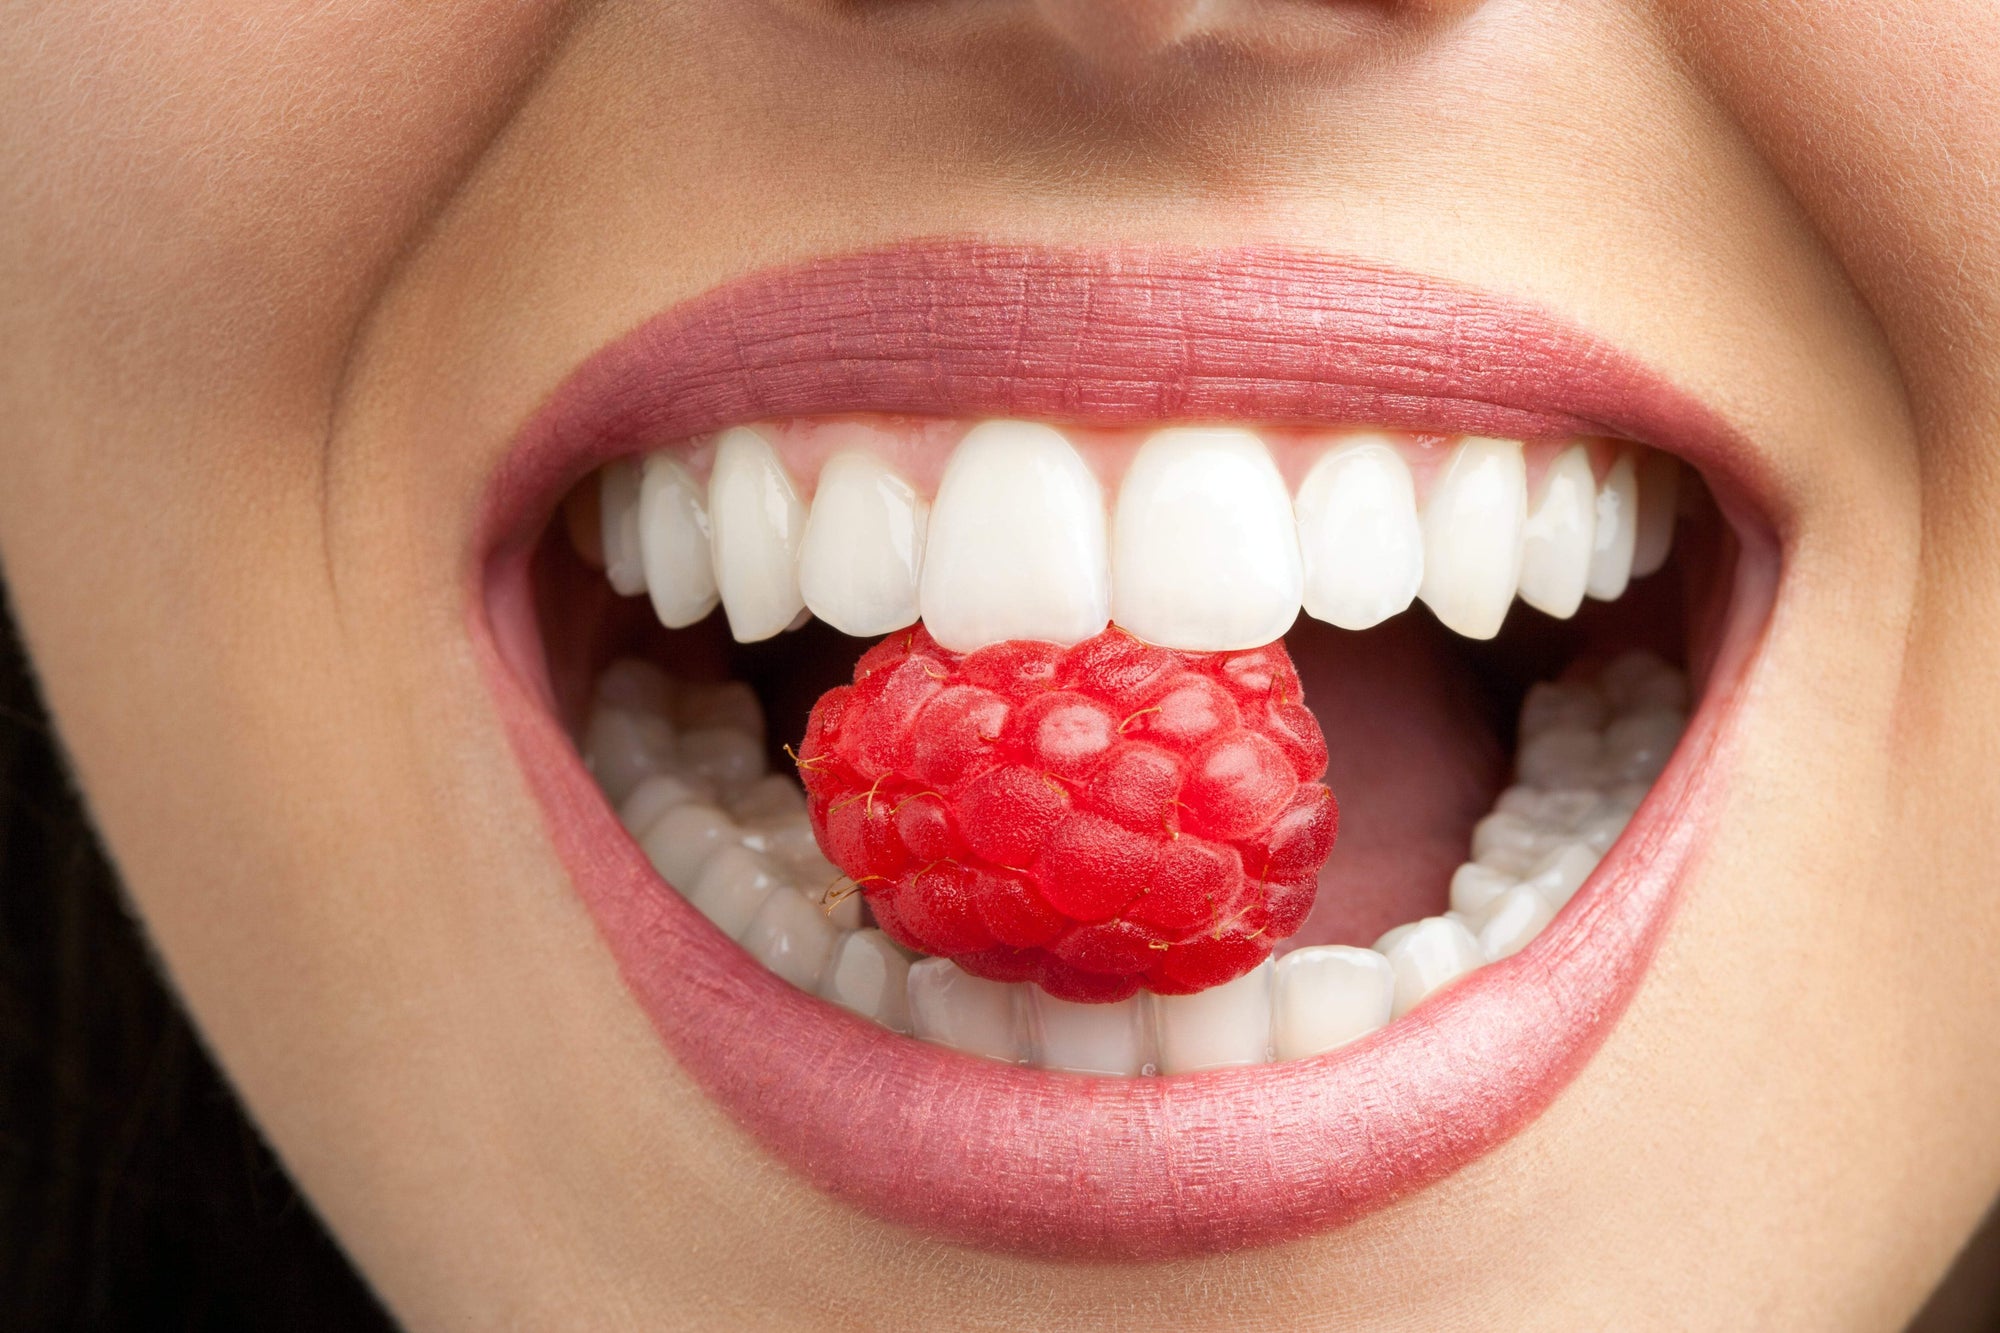 Preventing Cavities With Healthy Foods